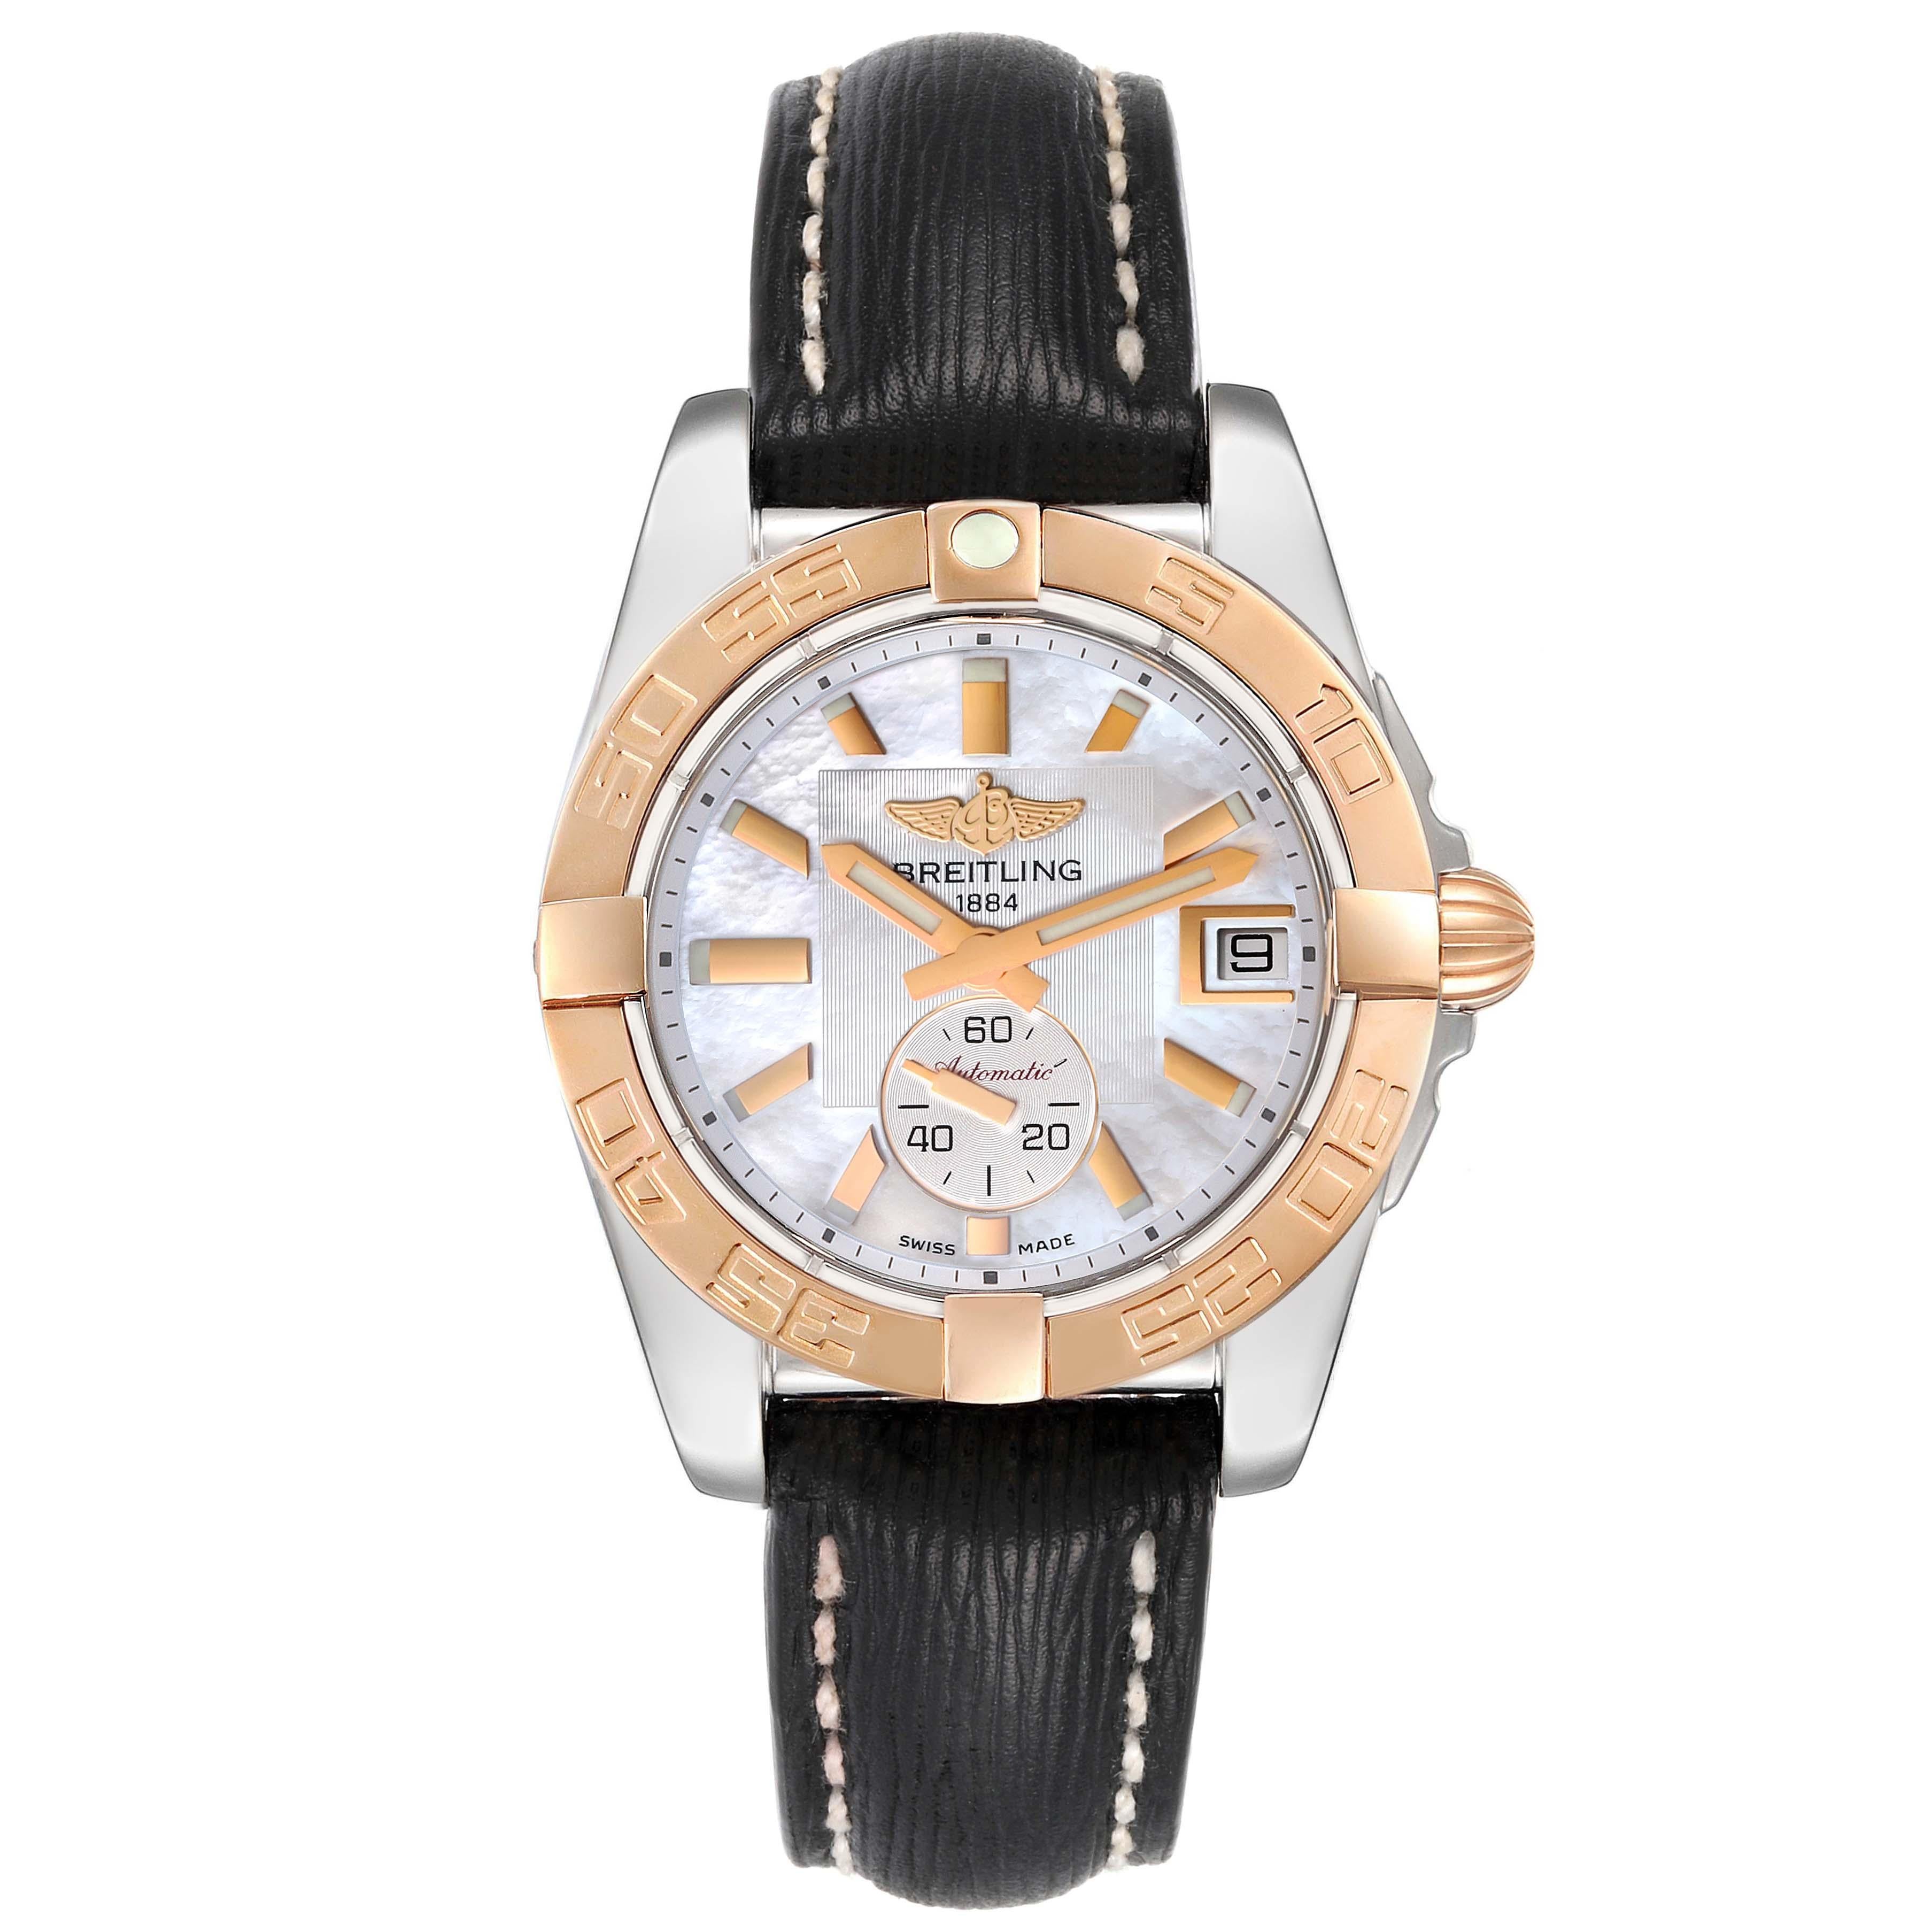 Breitling Galactic 36 Stainless Steel Rose Gold Mother of Pearl Dial Mens Watch C37330. Self-winding automatic officially certified chronometer movement. Stainless steel and 18K rose gold case 36.0 mm in diameter. 18k rose gold ratcheted